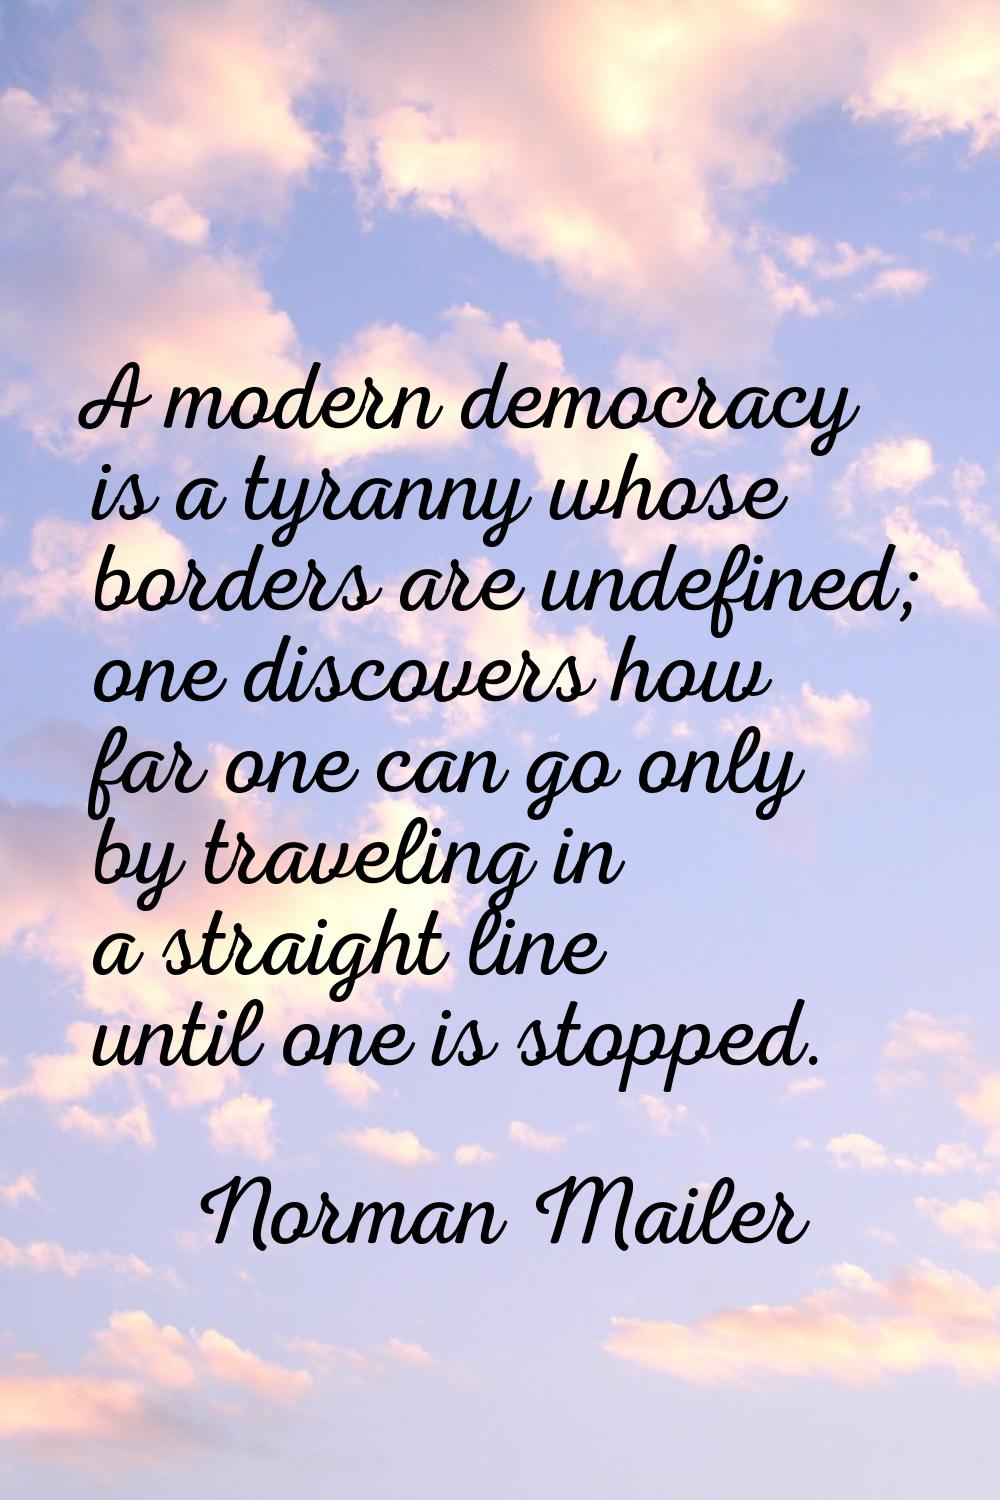 A modern democracy is a tyranny whose borders are undefined; one discovers how far one can go only 